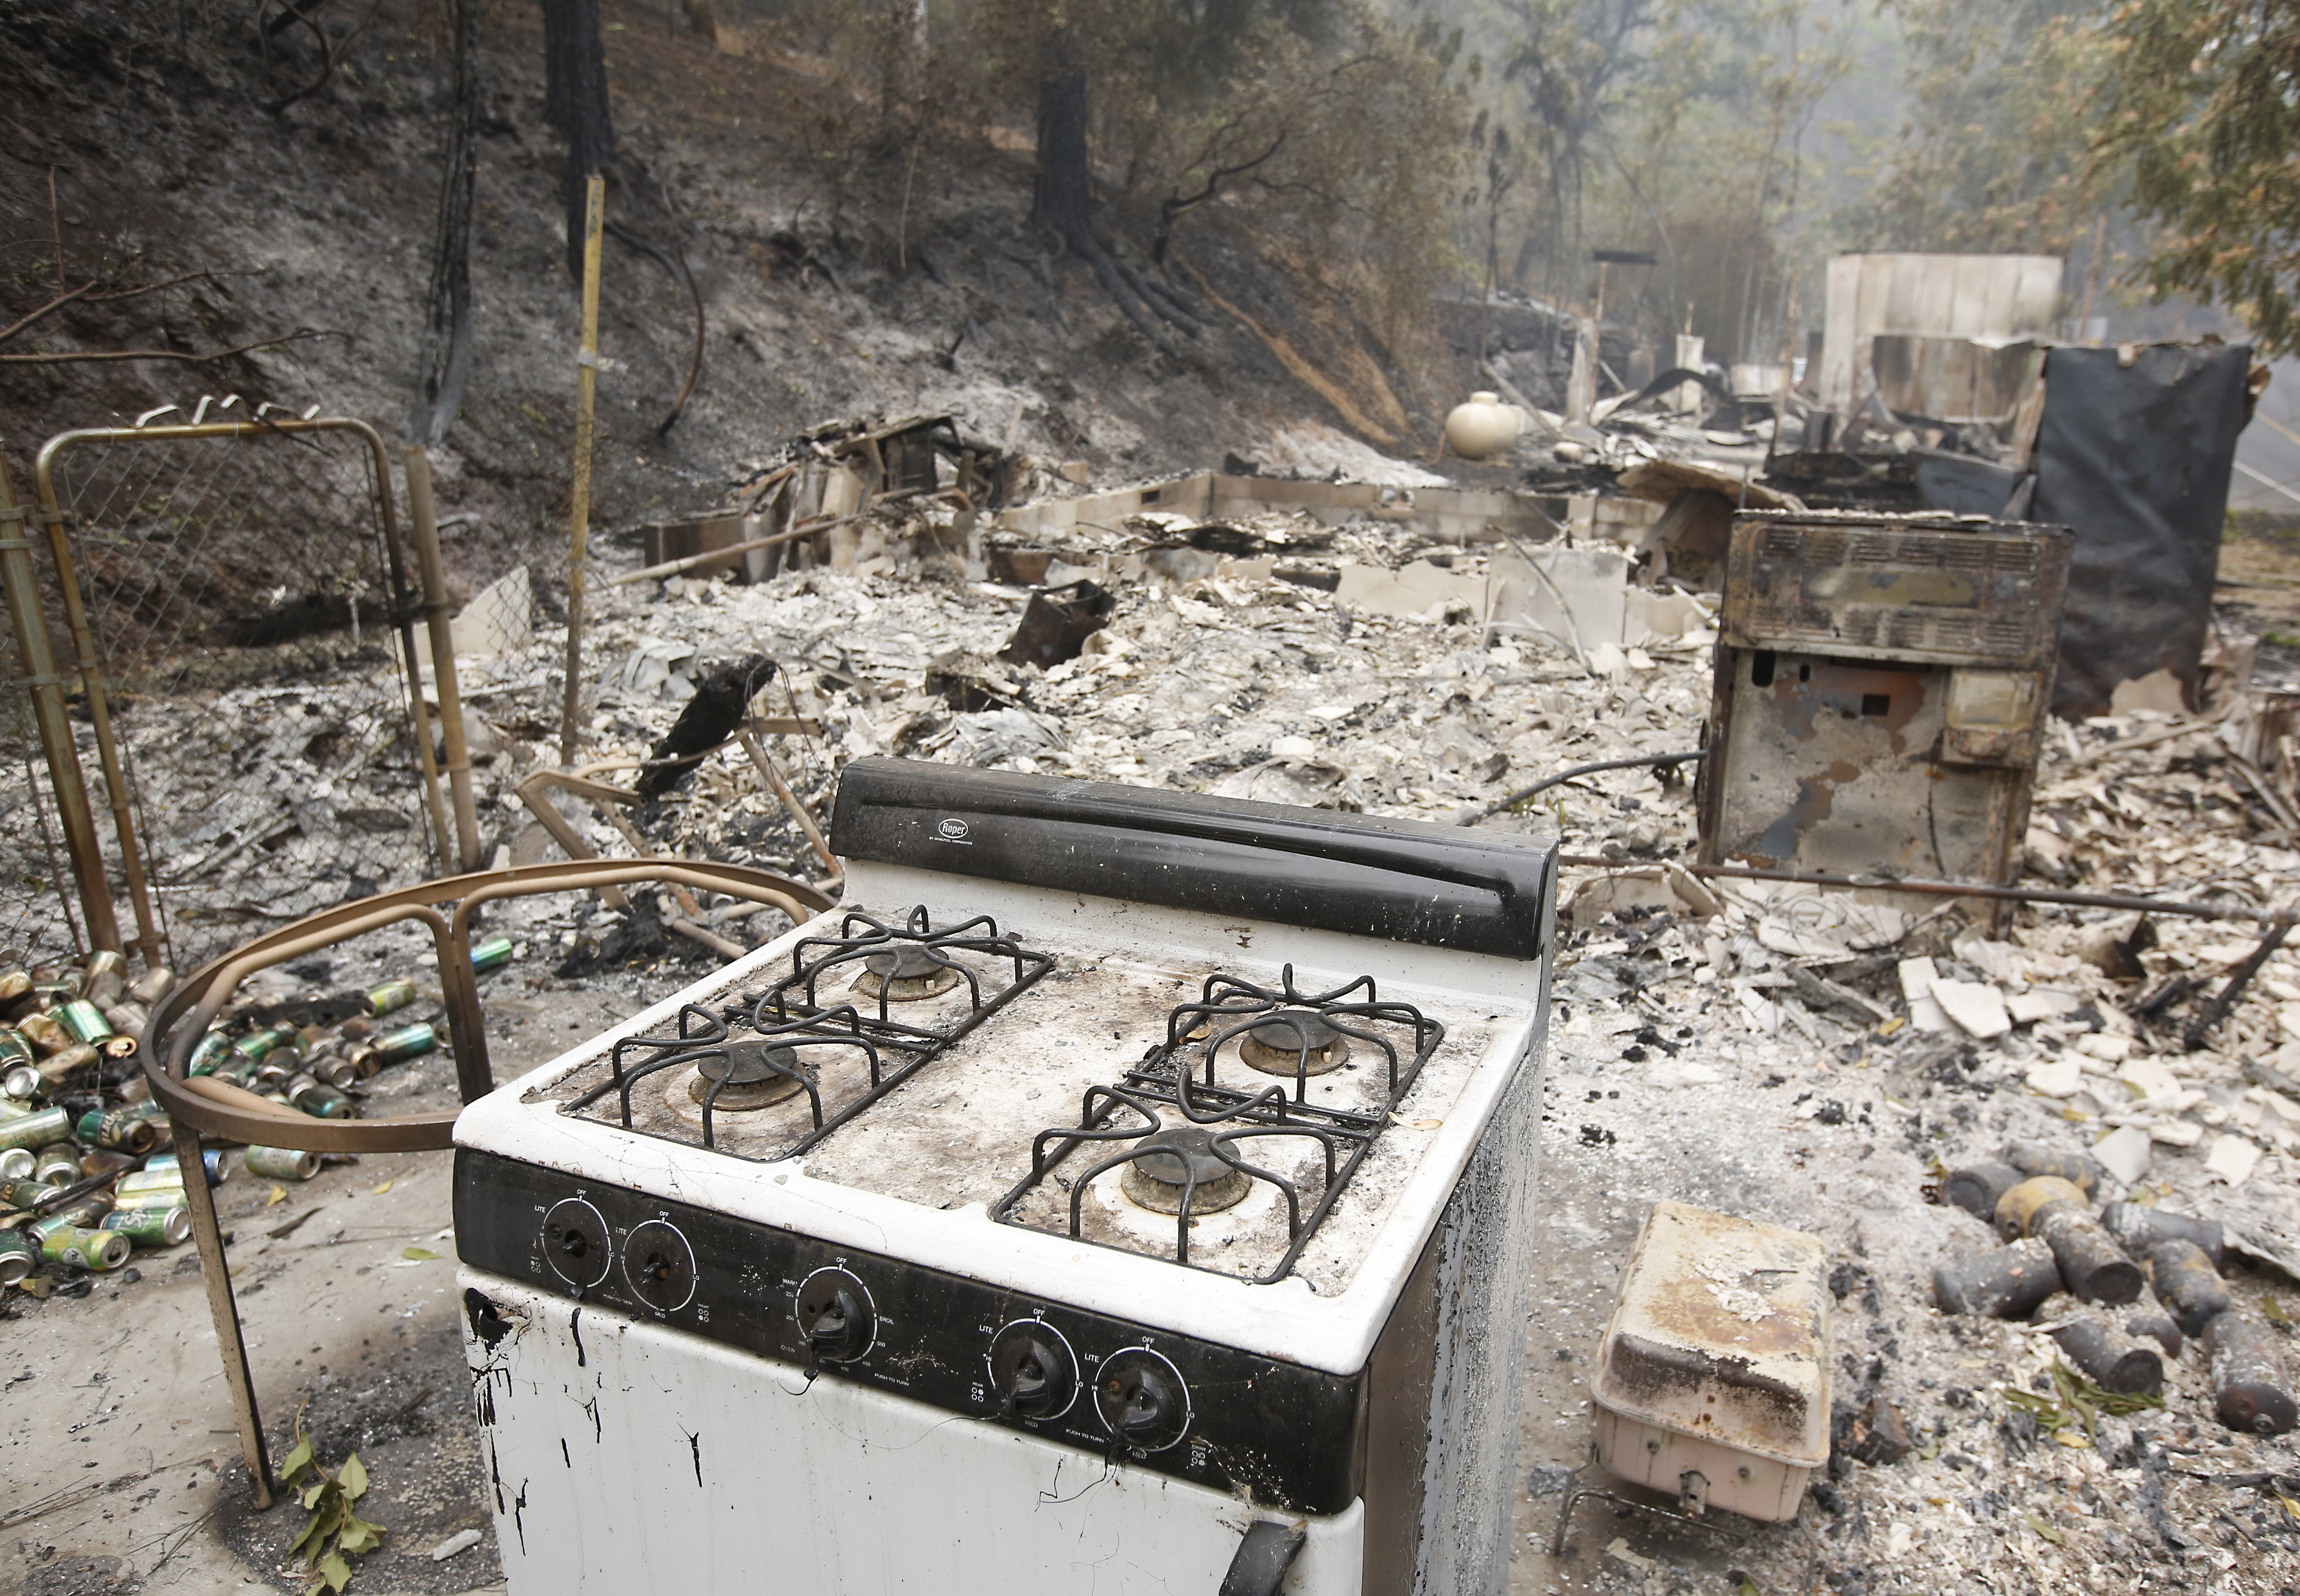 A kitchen stove sits among the remains of  home, Sunday, Sept. 13, 2015, destroyed by a fire near Mokelumne Hill, Calif. Two of California's fastest-burning wildfires in decades overtook several Northern California towns, destroying homes and sending residents fleeing. (AP Photo/Rich Pedroncelli)